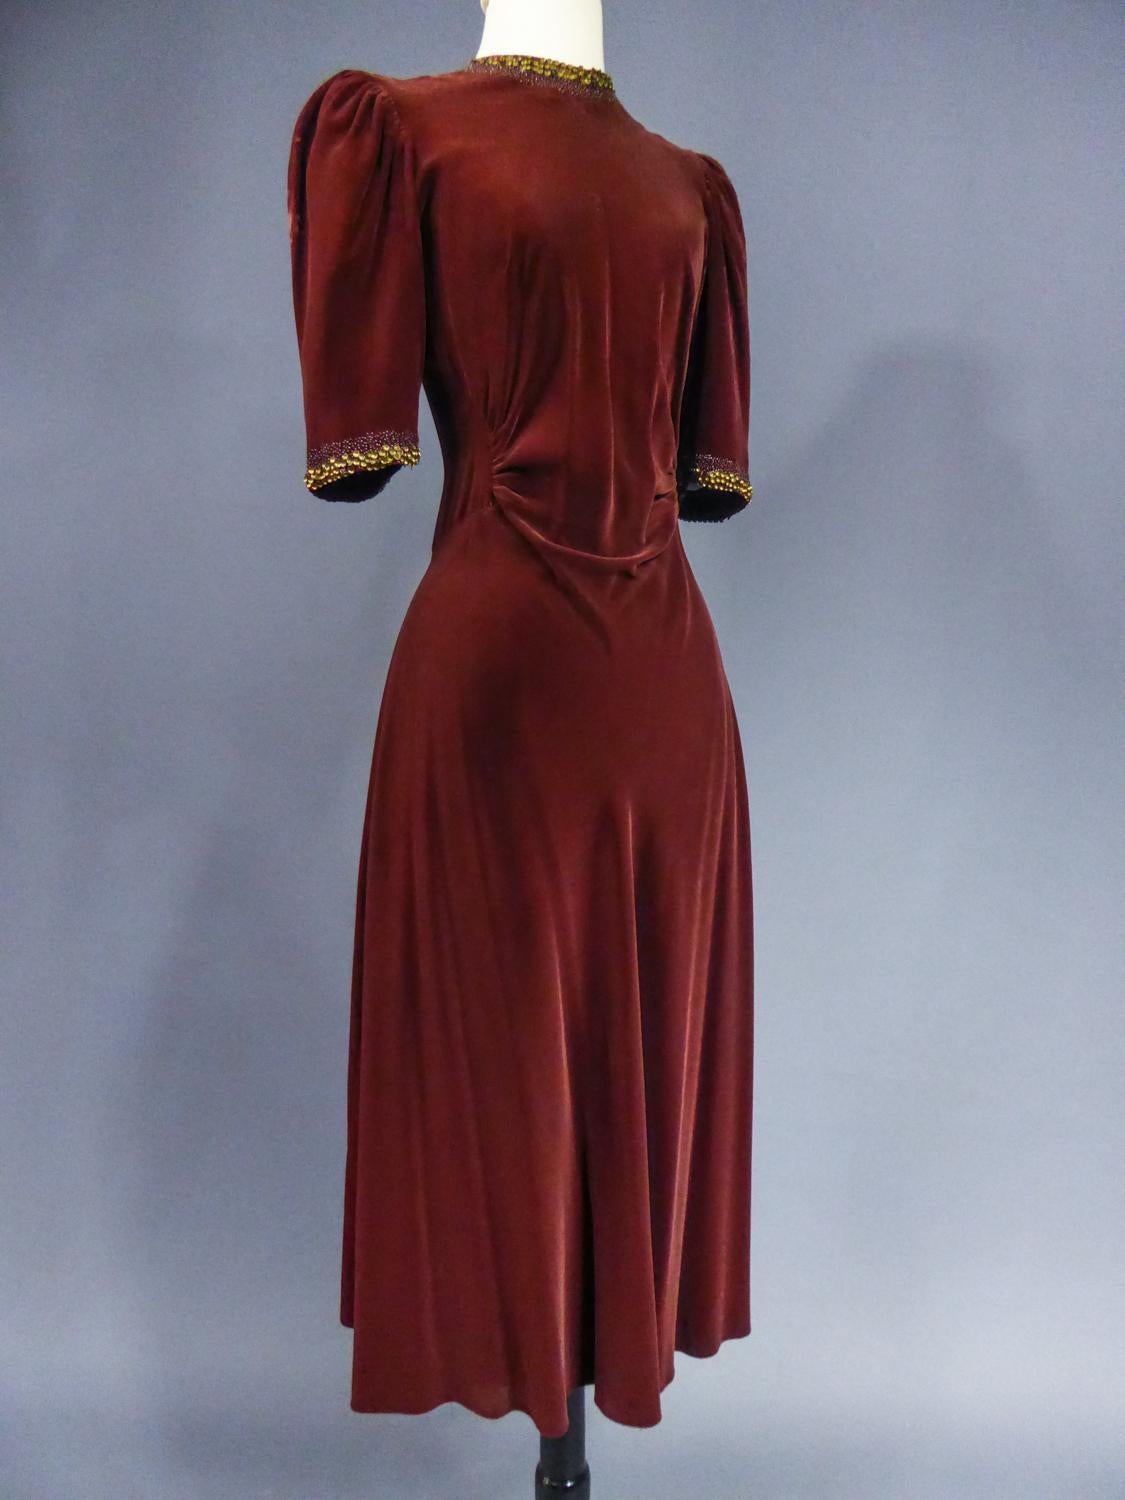 A French Couture Beaded Chocolate Velvet Dress Circa 1940-1950 In Good Condition For Sale In Toulon, FR